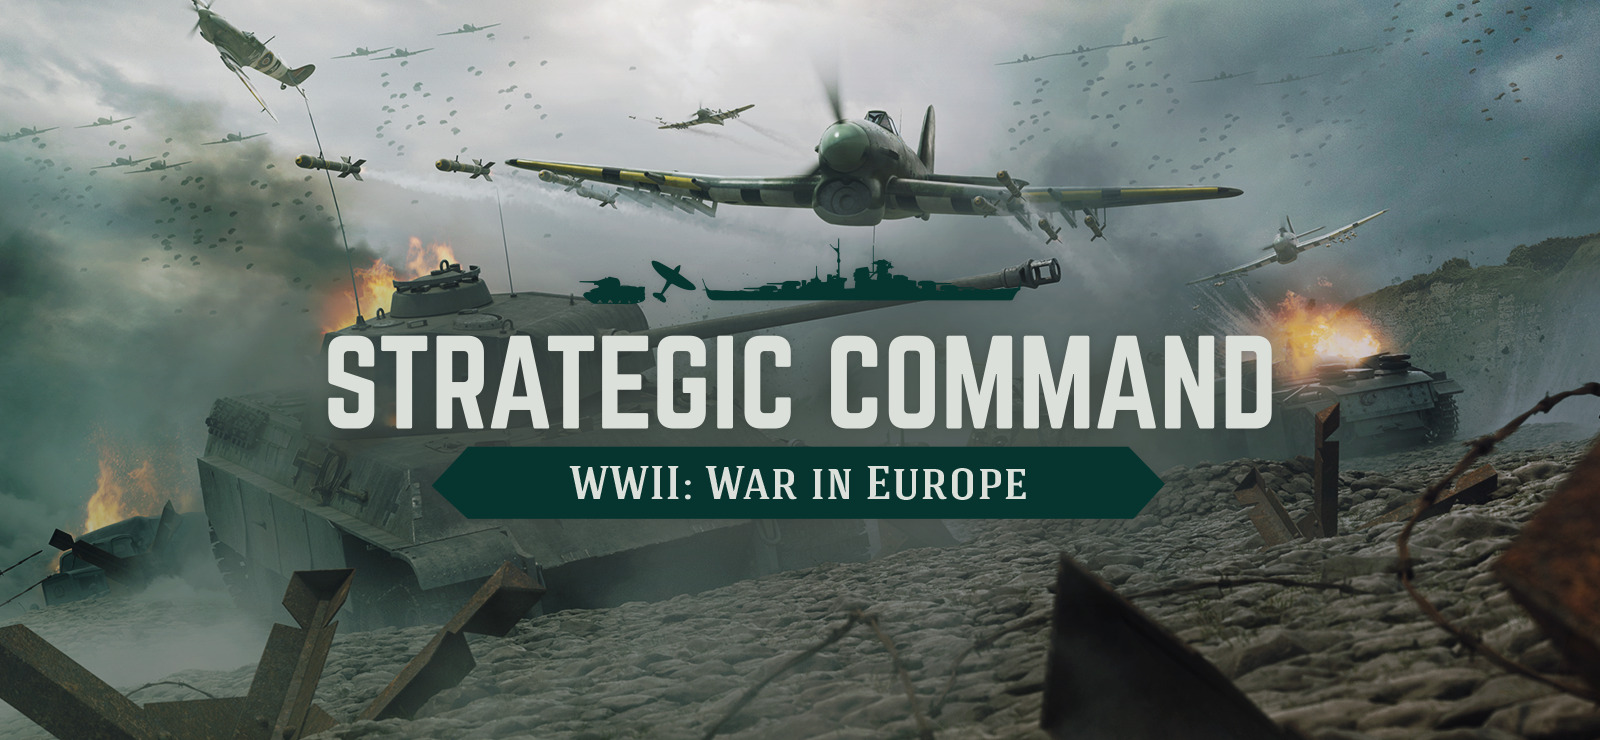 strategic command wwii war in europe review